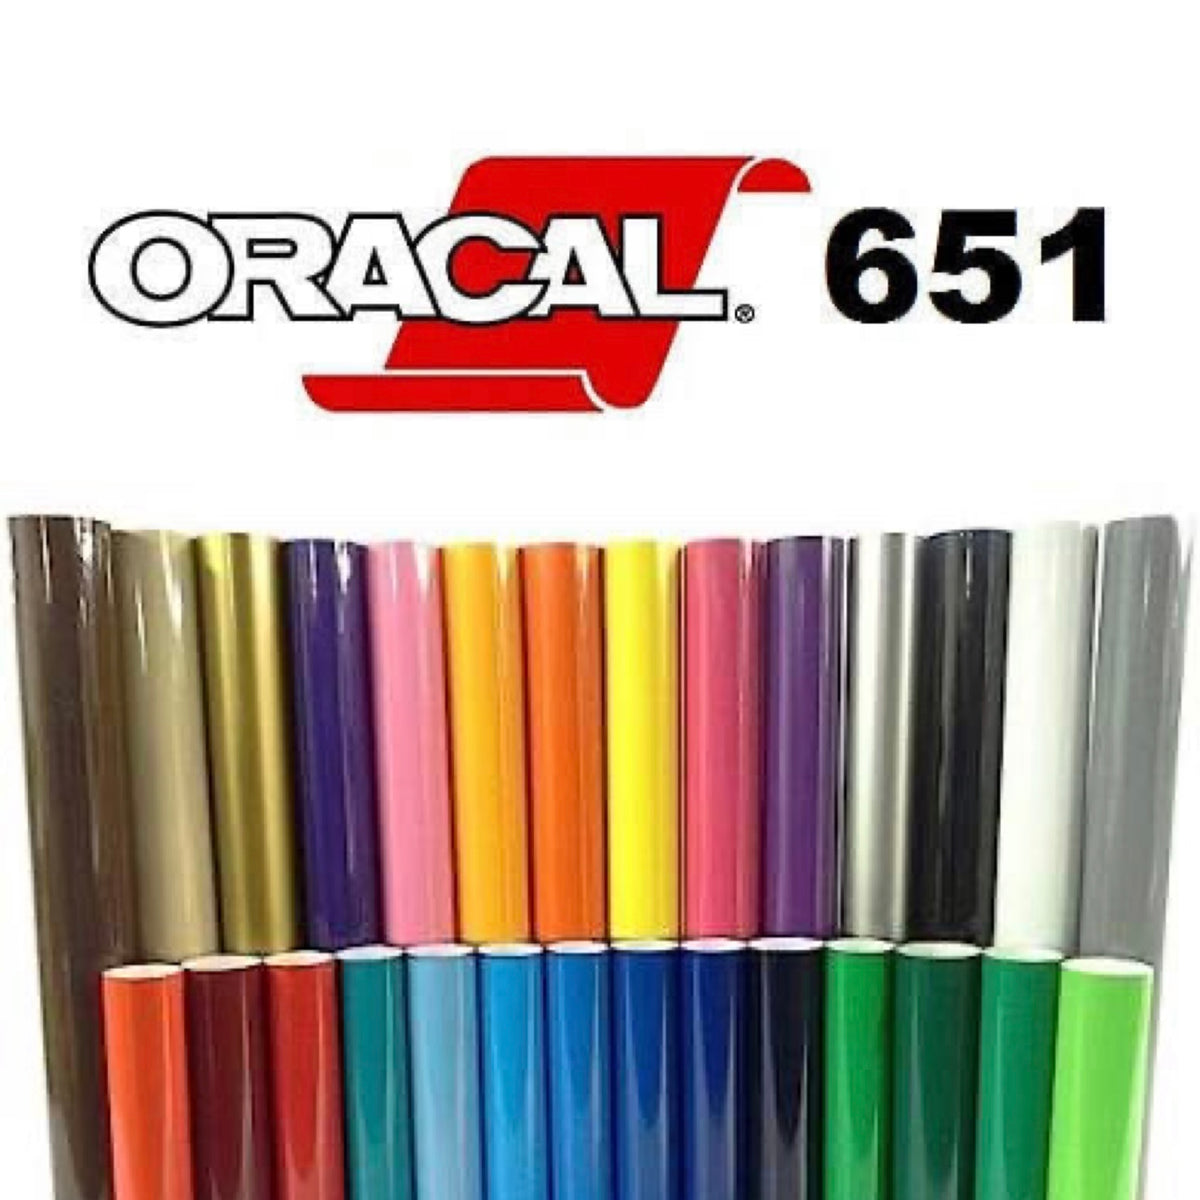 Oracal 651 -Yellow Green - 064 - 12 x 10 ft Roll